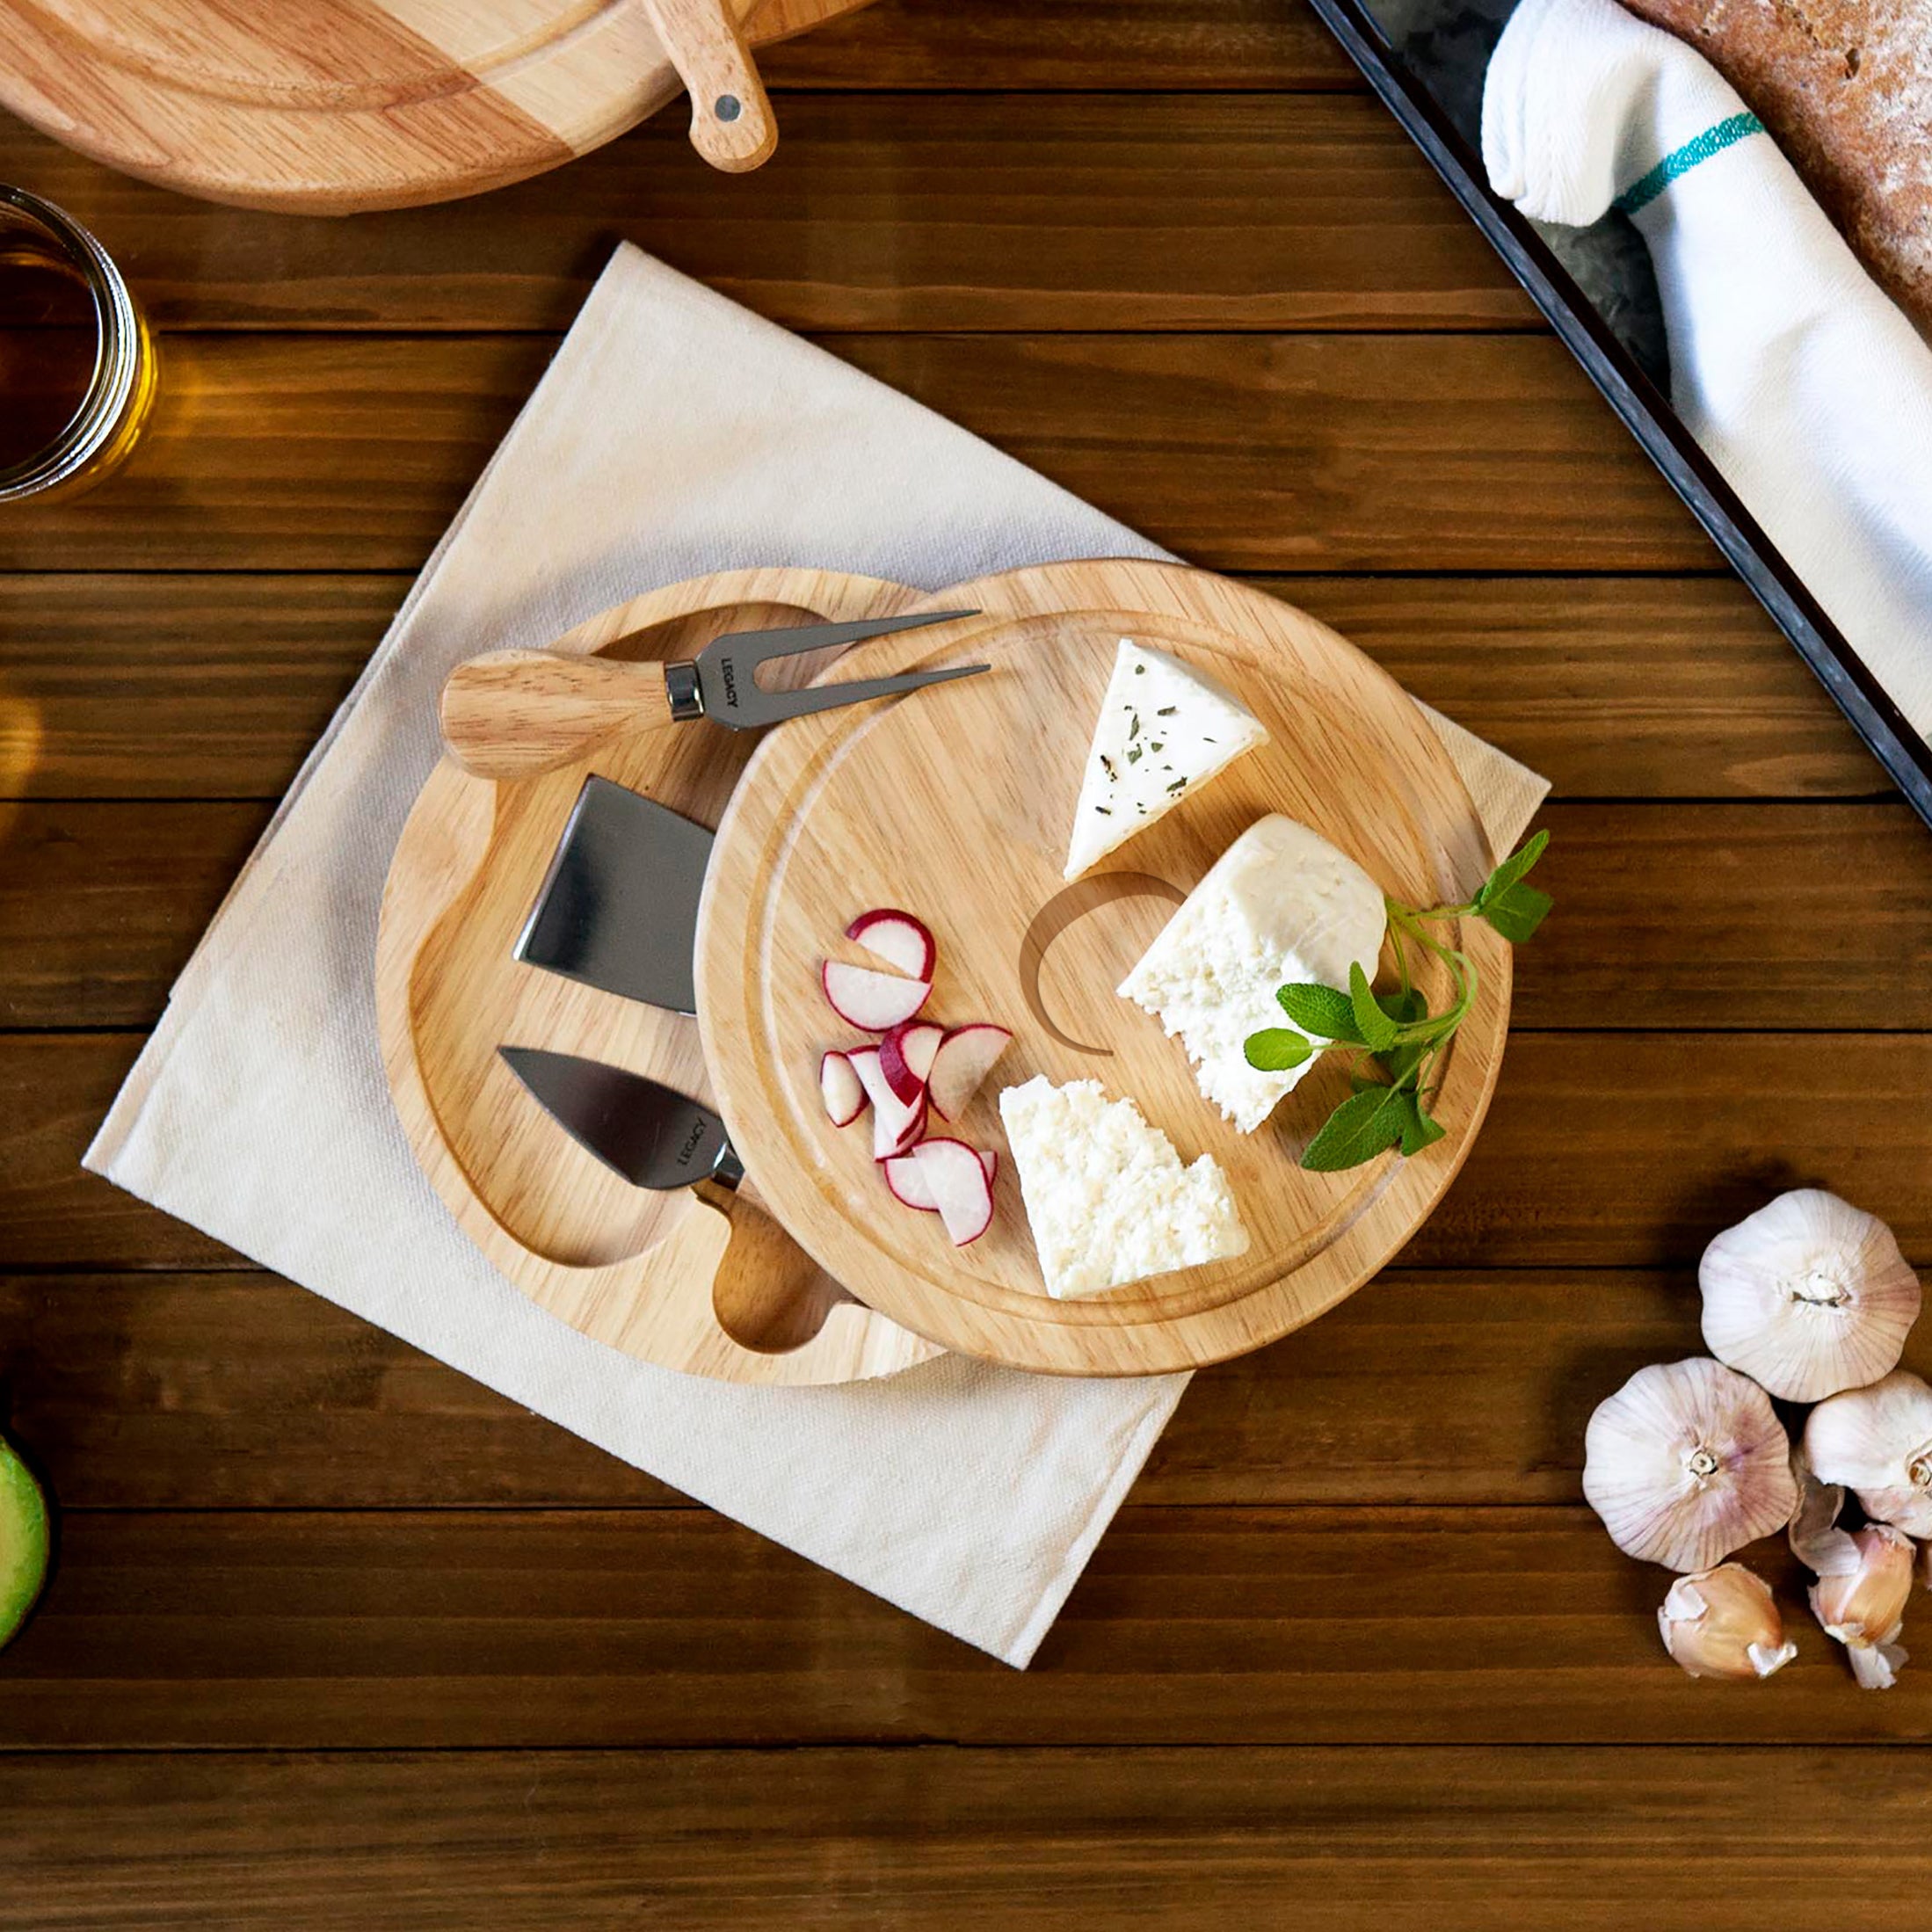 Monogram - Parawood Brie Cheese Cutting Board & Tools Set